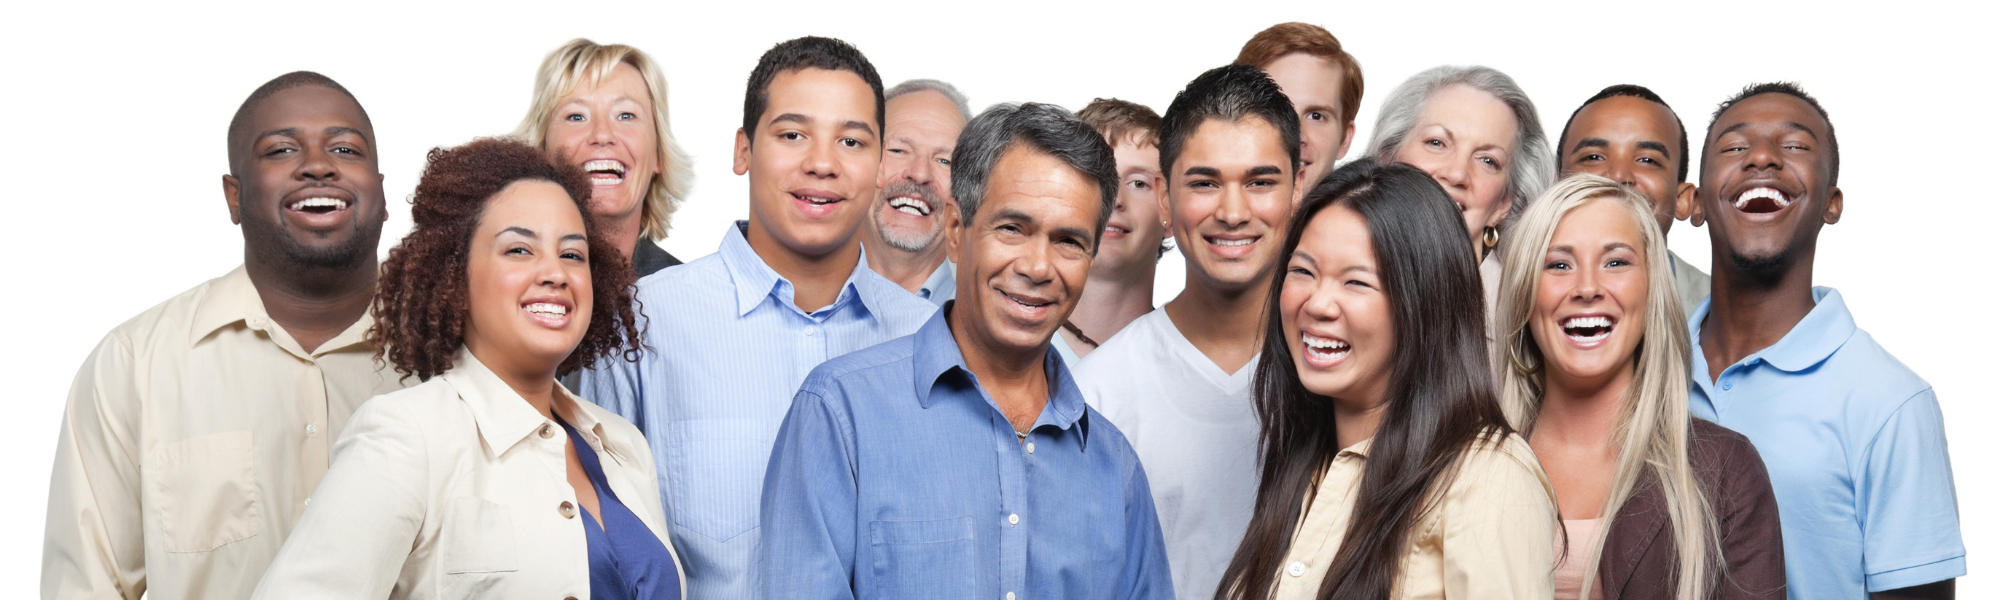 Group of people smiling against a white background 